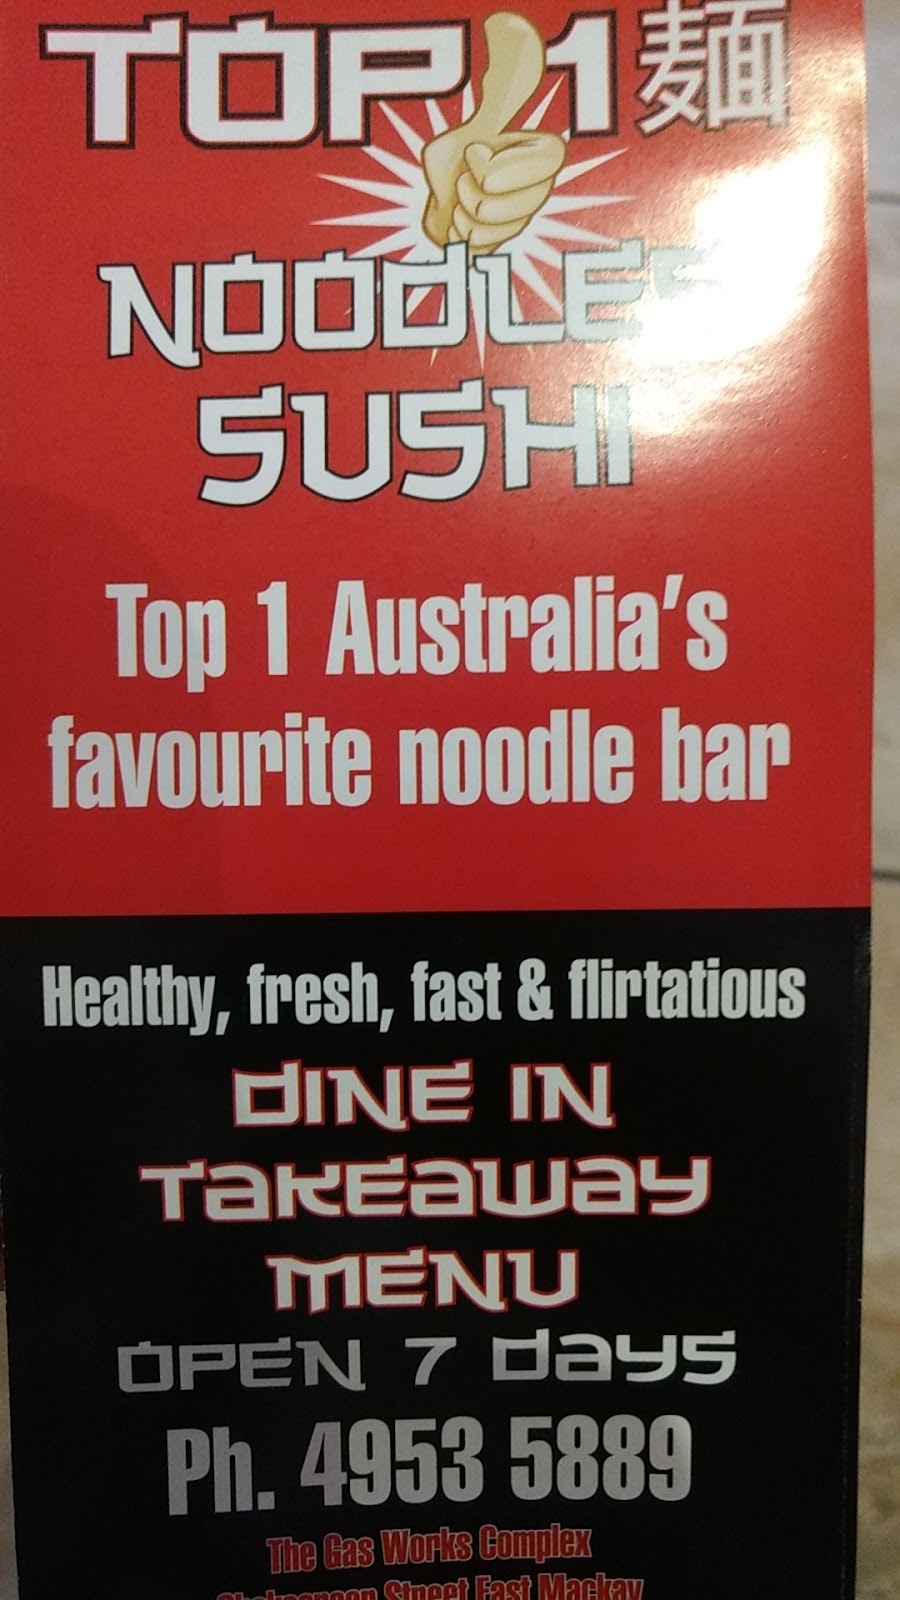 Top 1 Noodles Sushi | restaurant | Shakespeare St, East Mackay QLD 4740, Australia | 49535889 OR +61 49535889